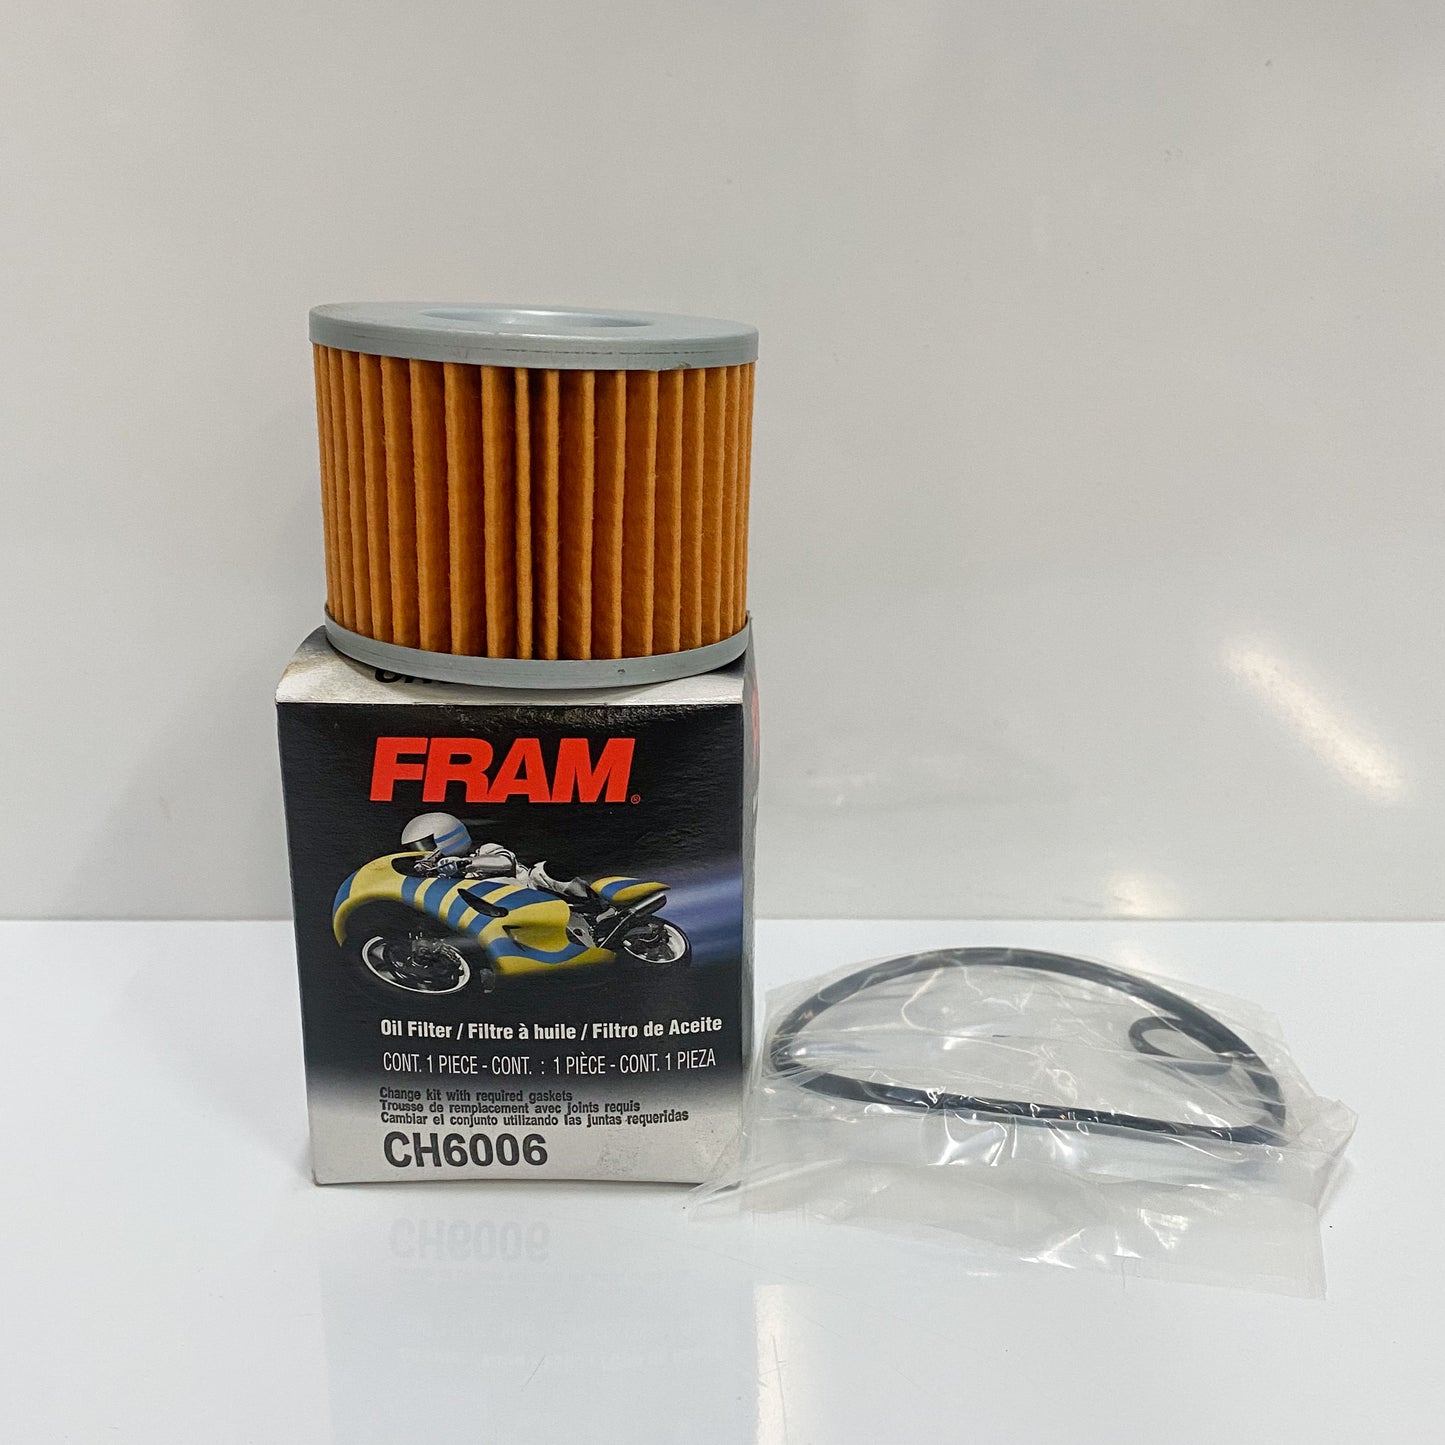 FRAM EXTRA GUARD CH6006 MOTORCYCLE OIL FILTER